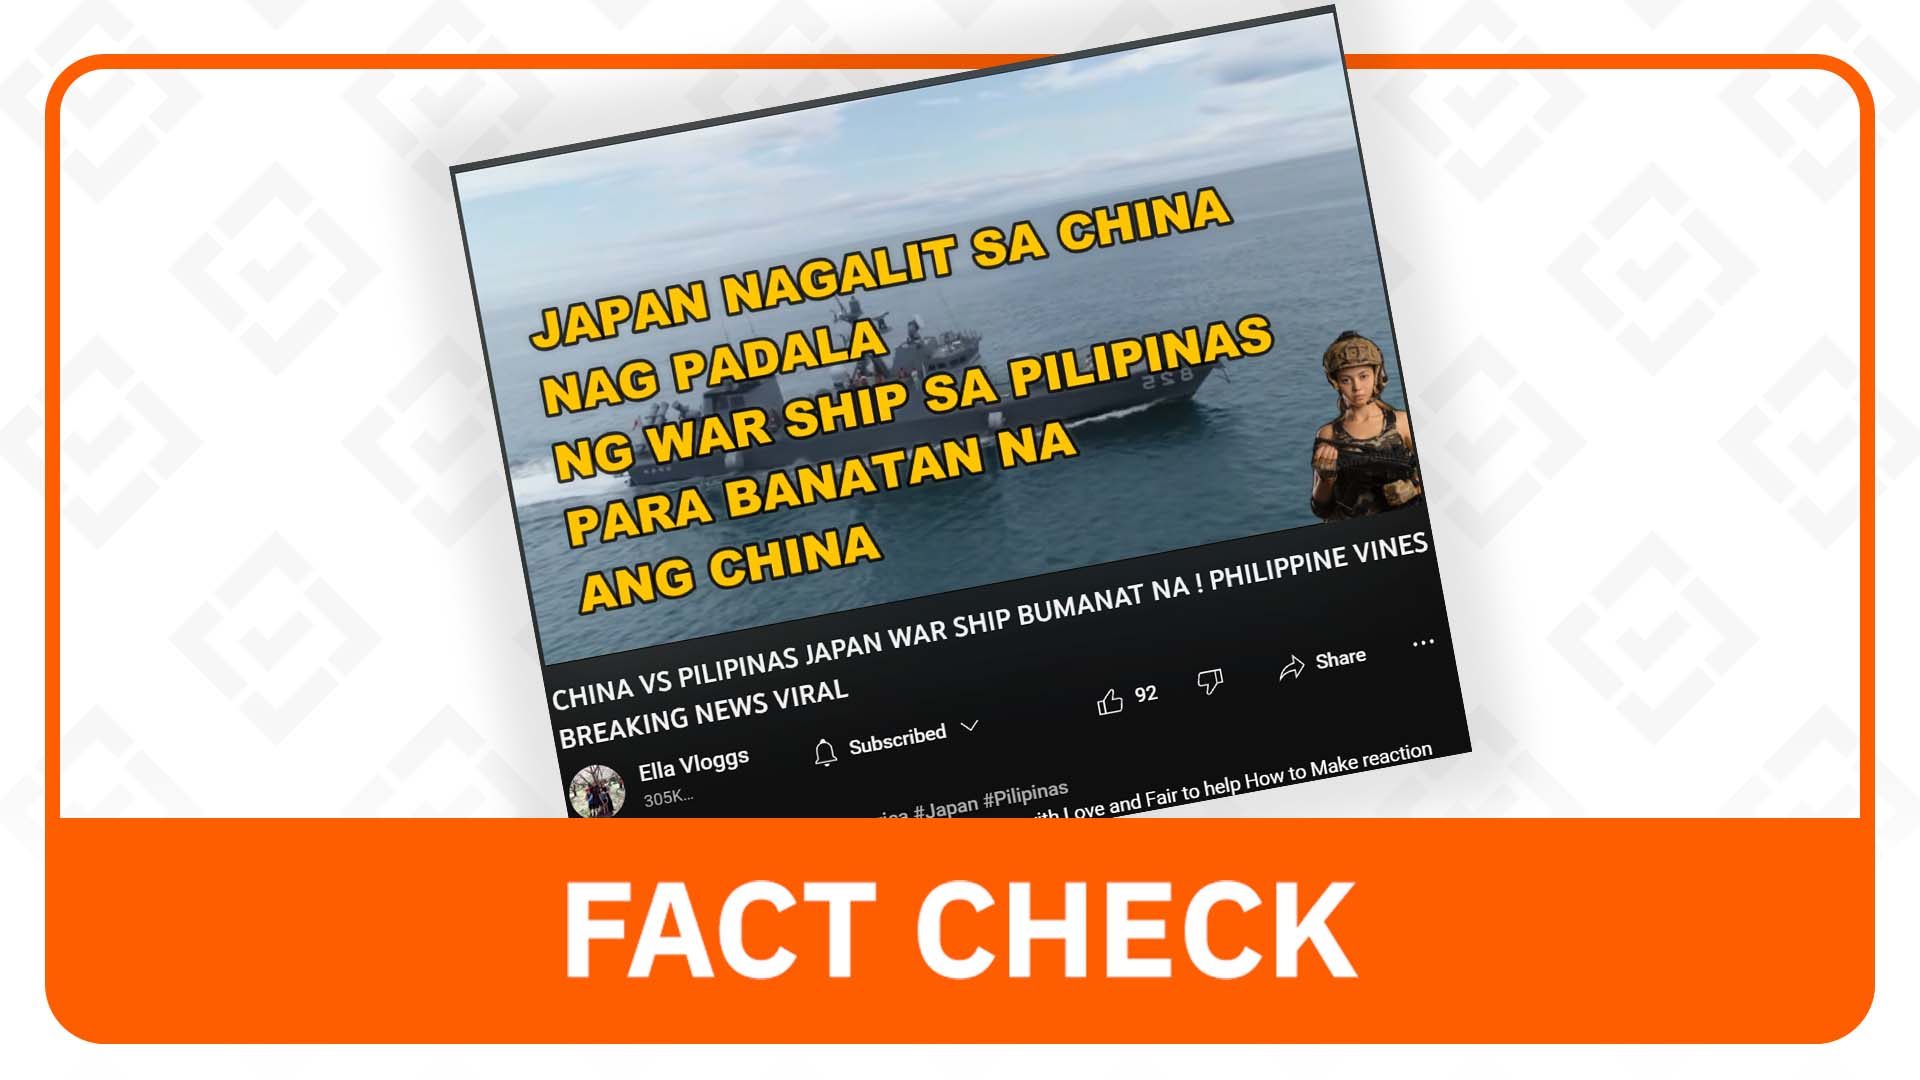 FACT CHECK: No Japanese ship sent to West Philippine Sea